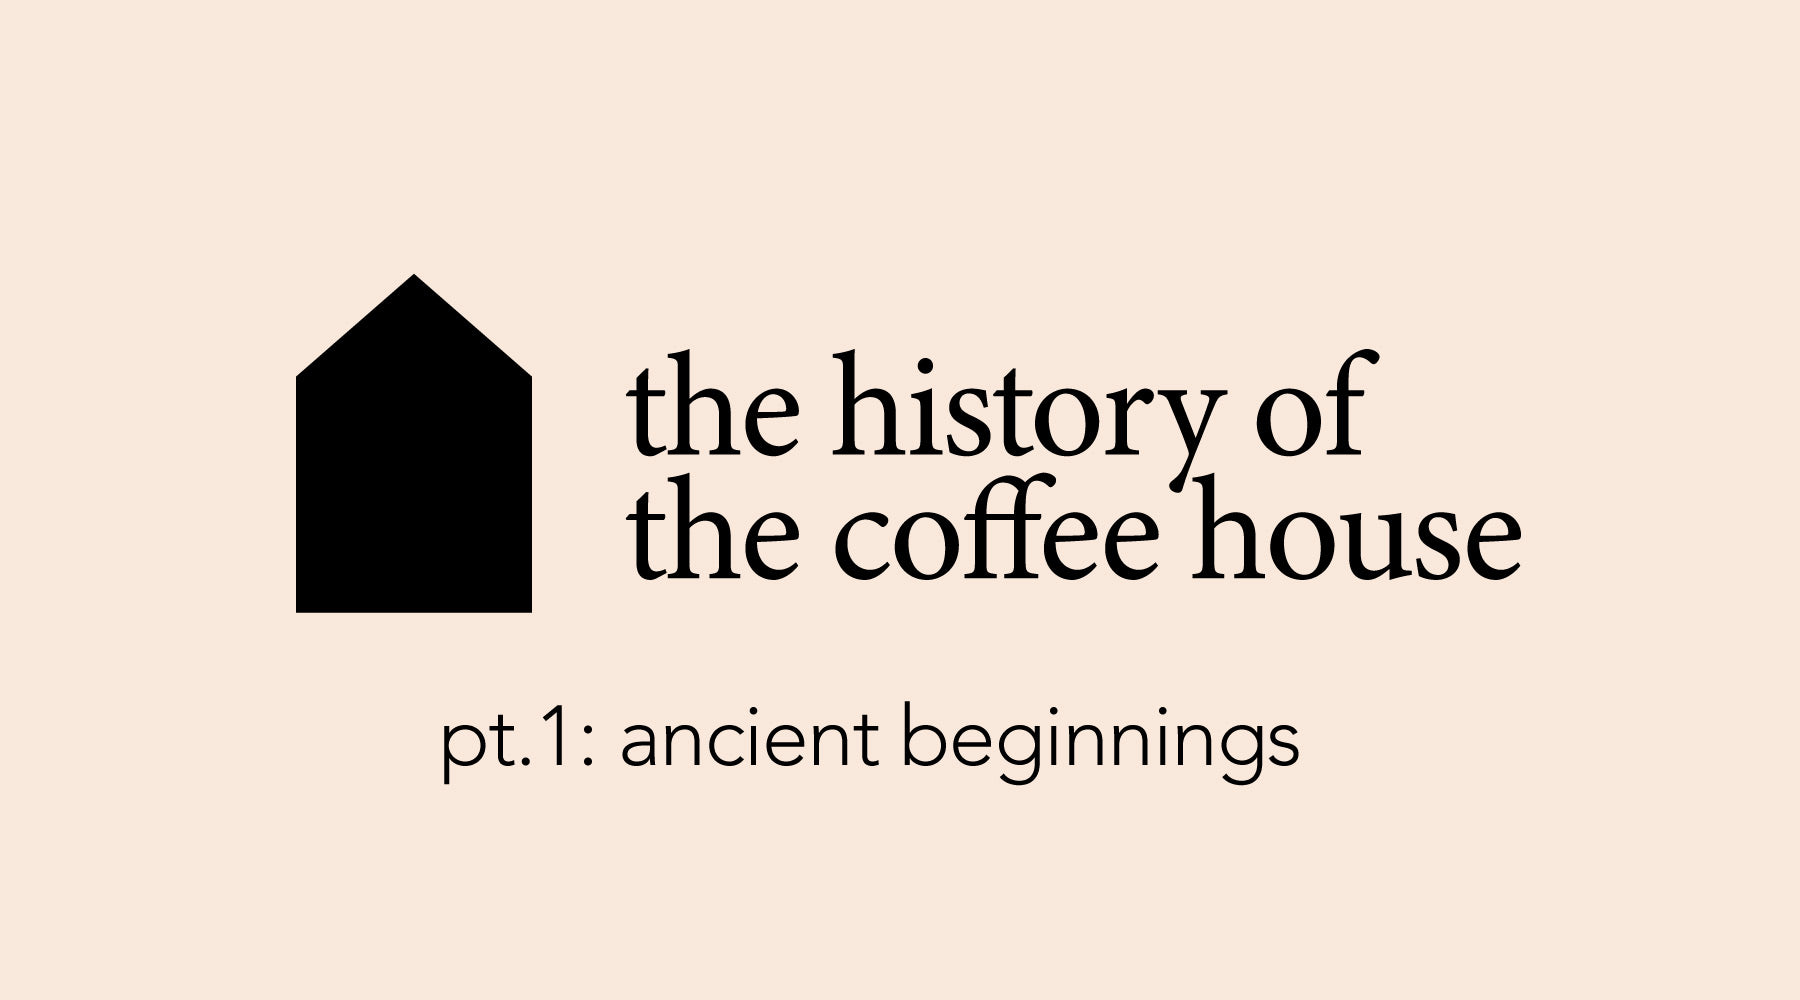 The Ancient Beginnings of the Coffee House